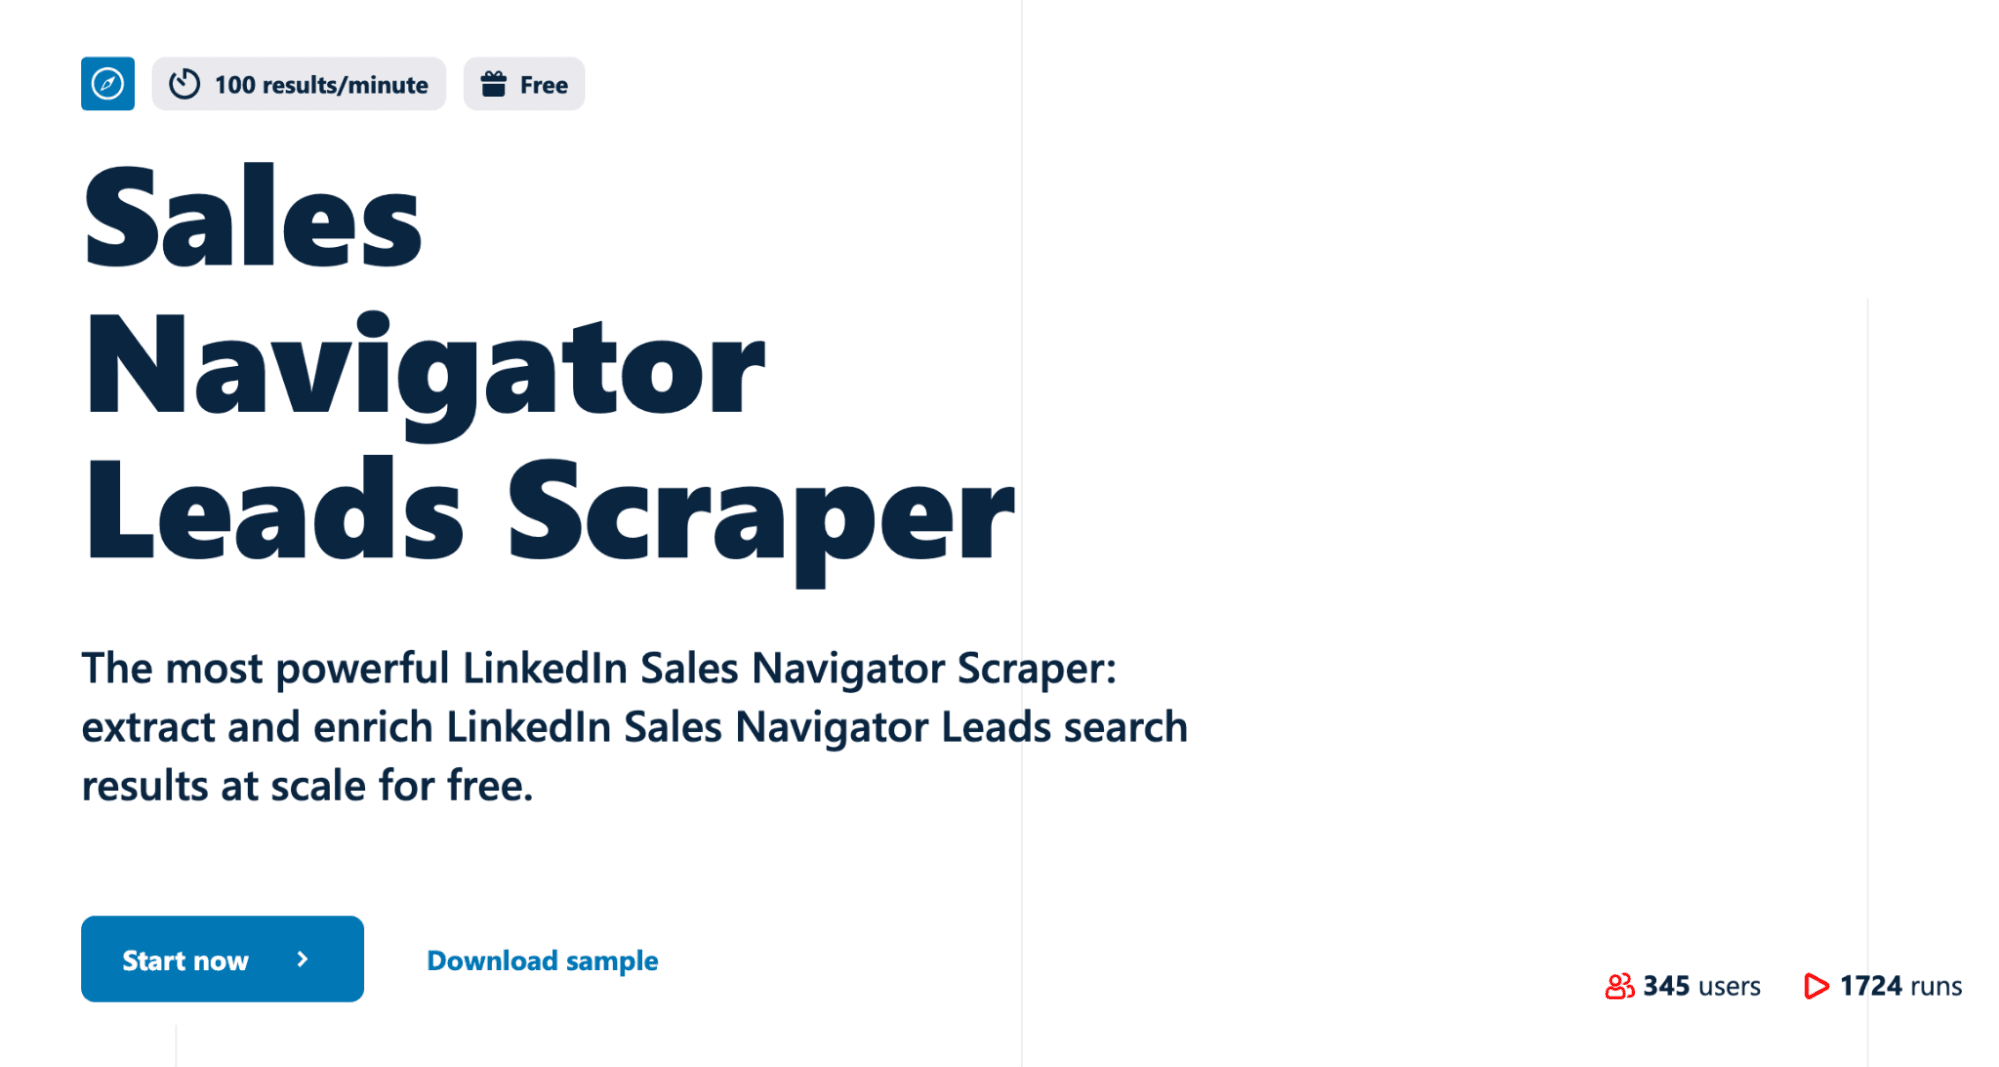 sales navigator leads scraper lobstr product page - image1.png